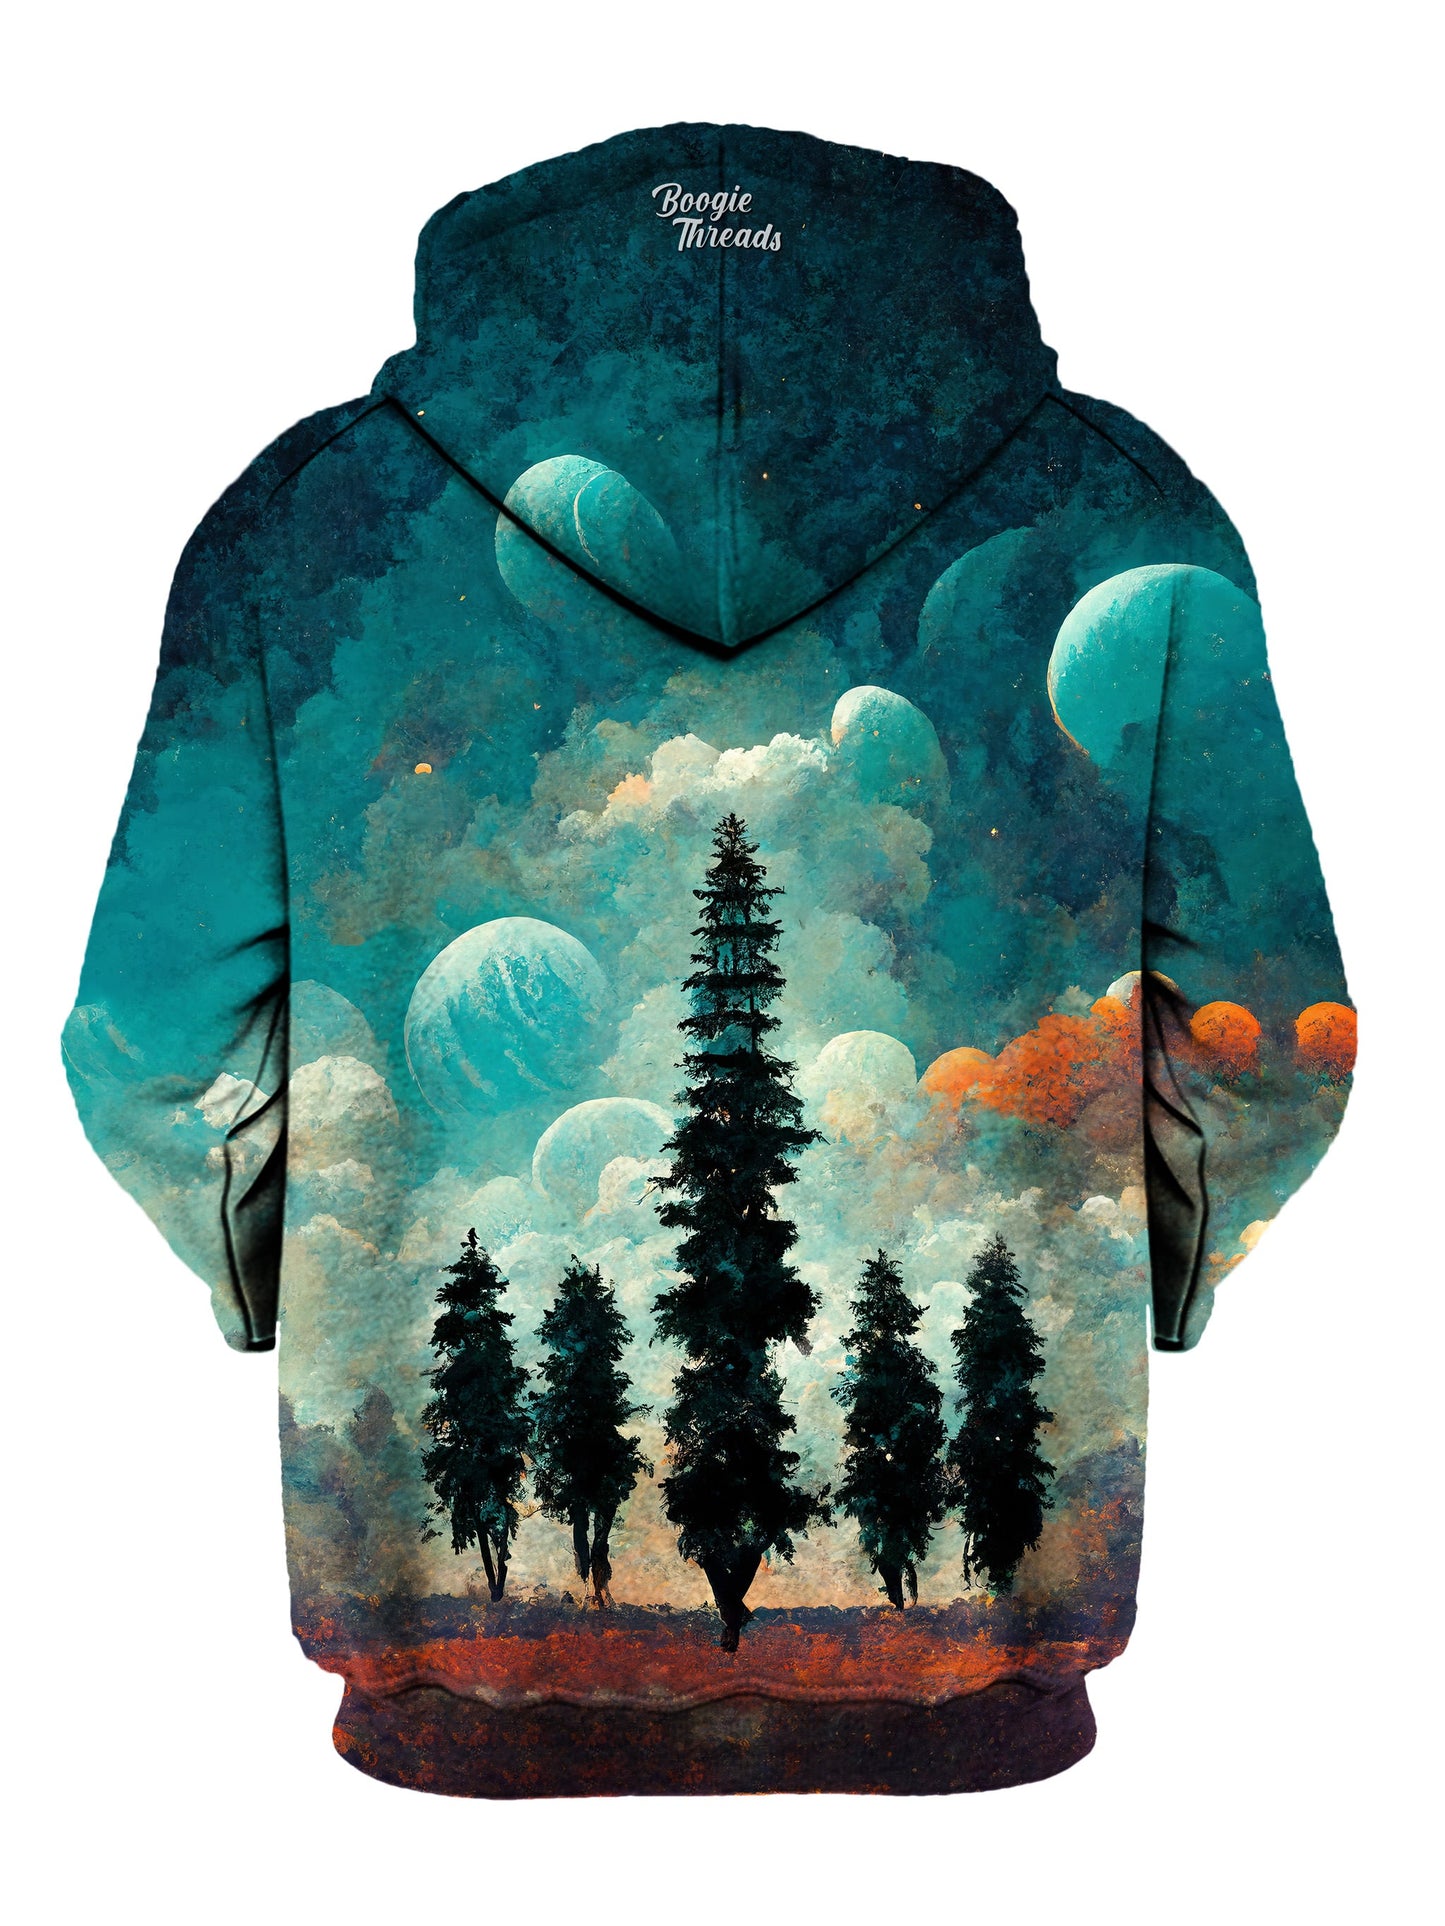 Composed Spring Unisex Pullover Hoodie - EDM Festival Clothing - Boogie Threads